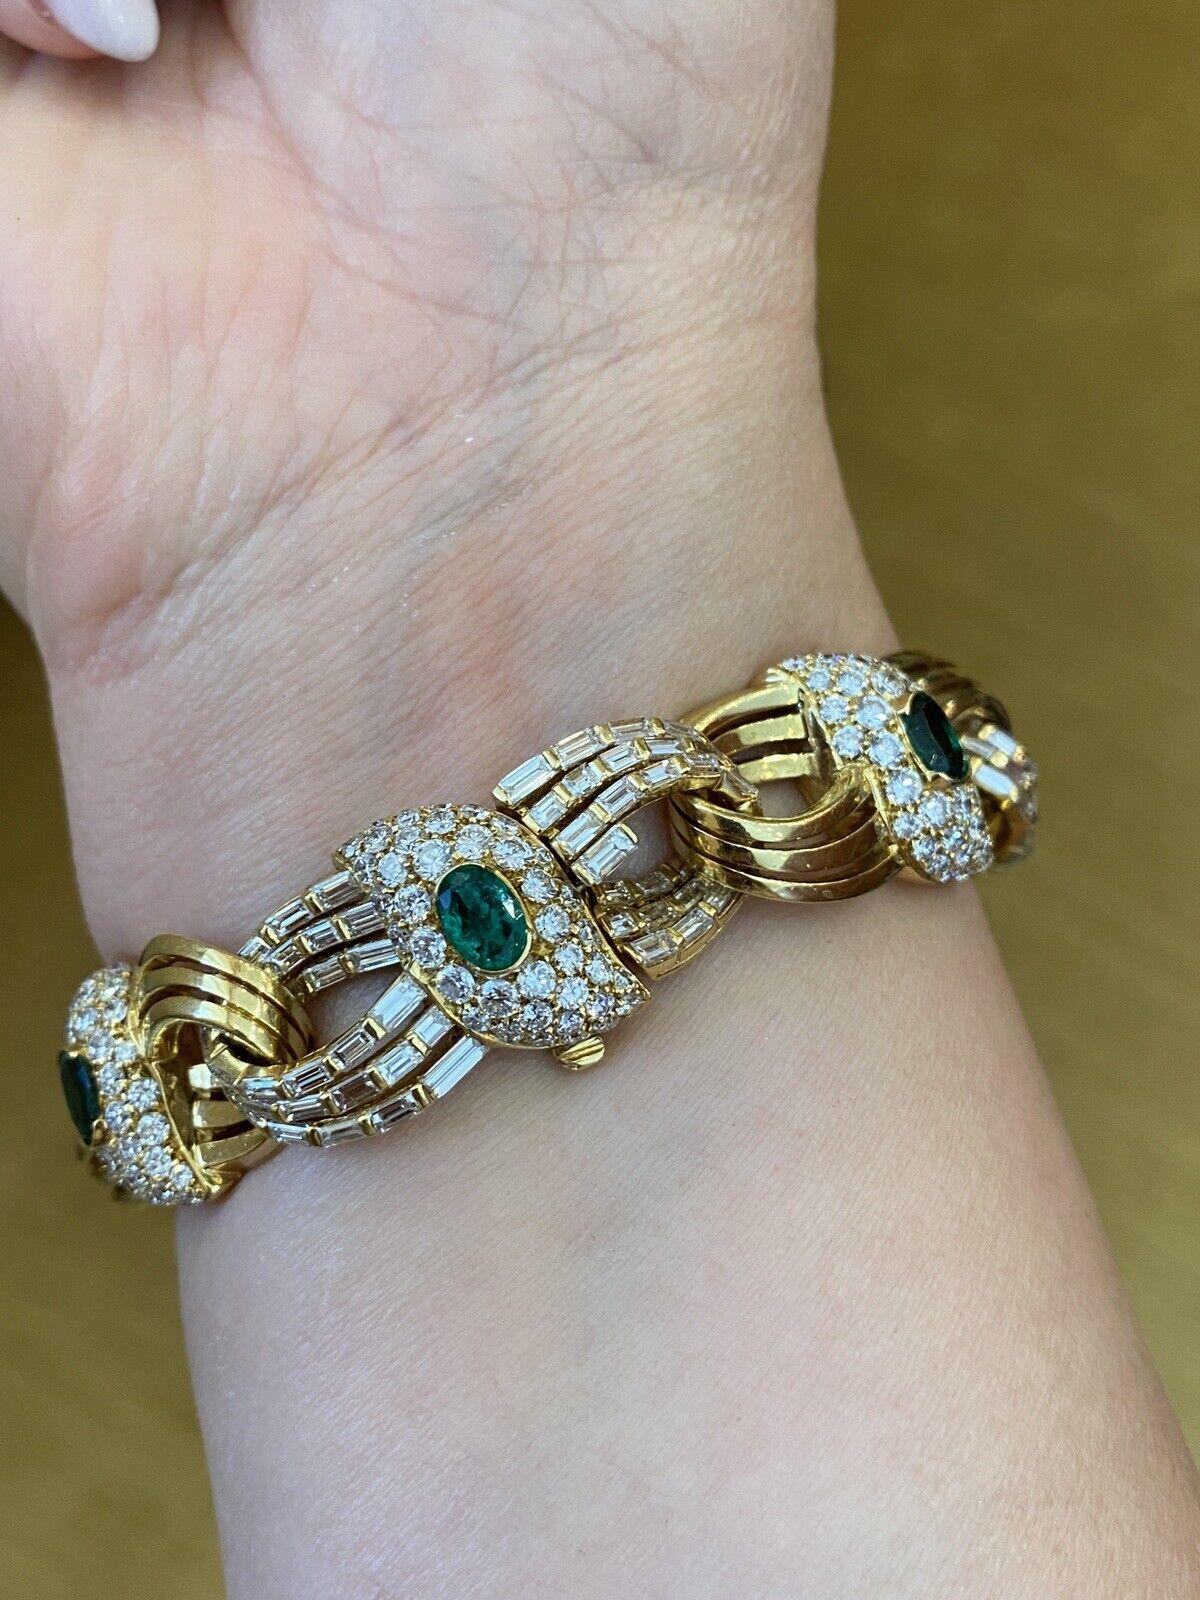 Emerald and Diamond Link Statement Bracelet by RCM in 18k Yellow Gold In Excellent Condition For Sale In La Jolla, CA